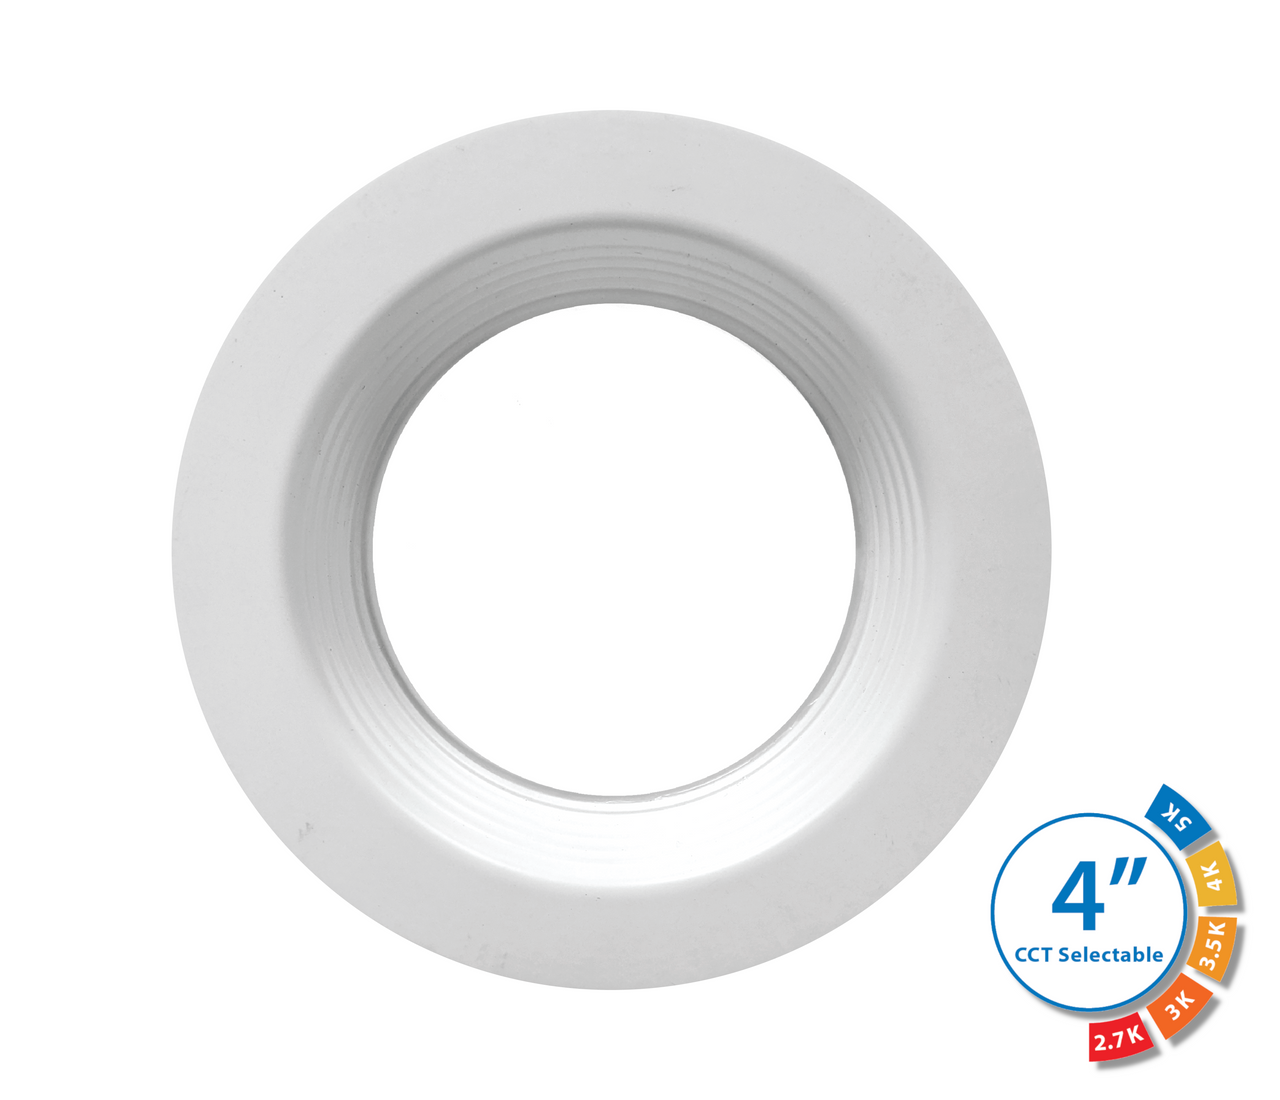 NICOR DLR4607120SWHBF DLR4(v6) 4-inch White Selectable Recessed LED Downlight with Baffle